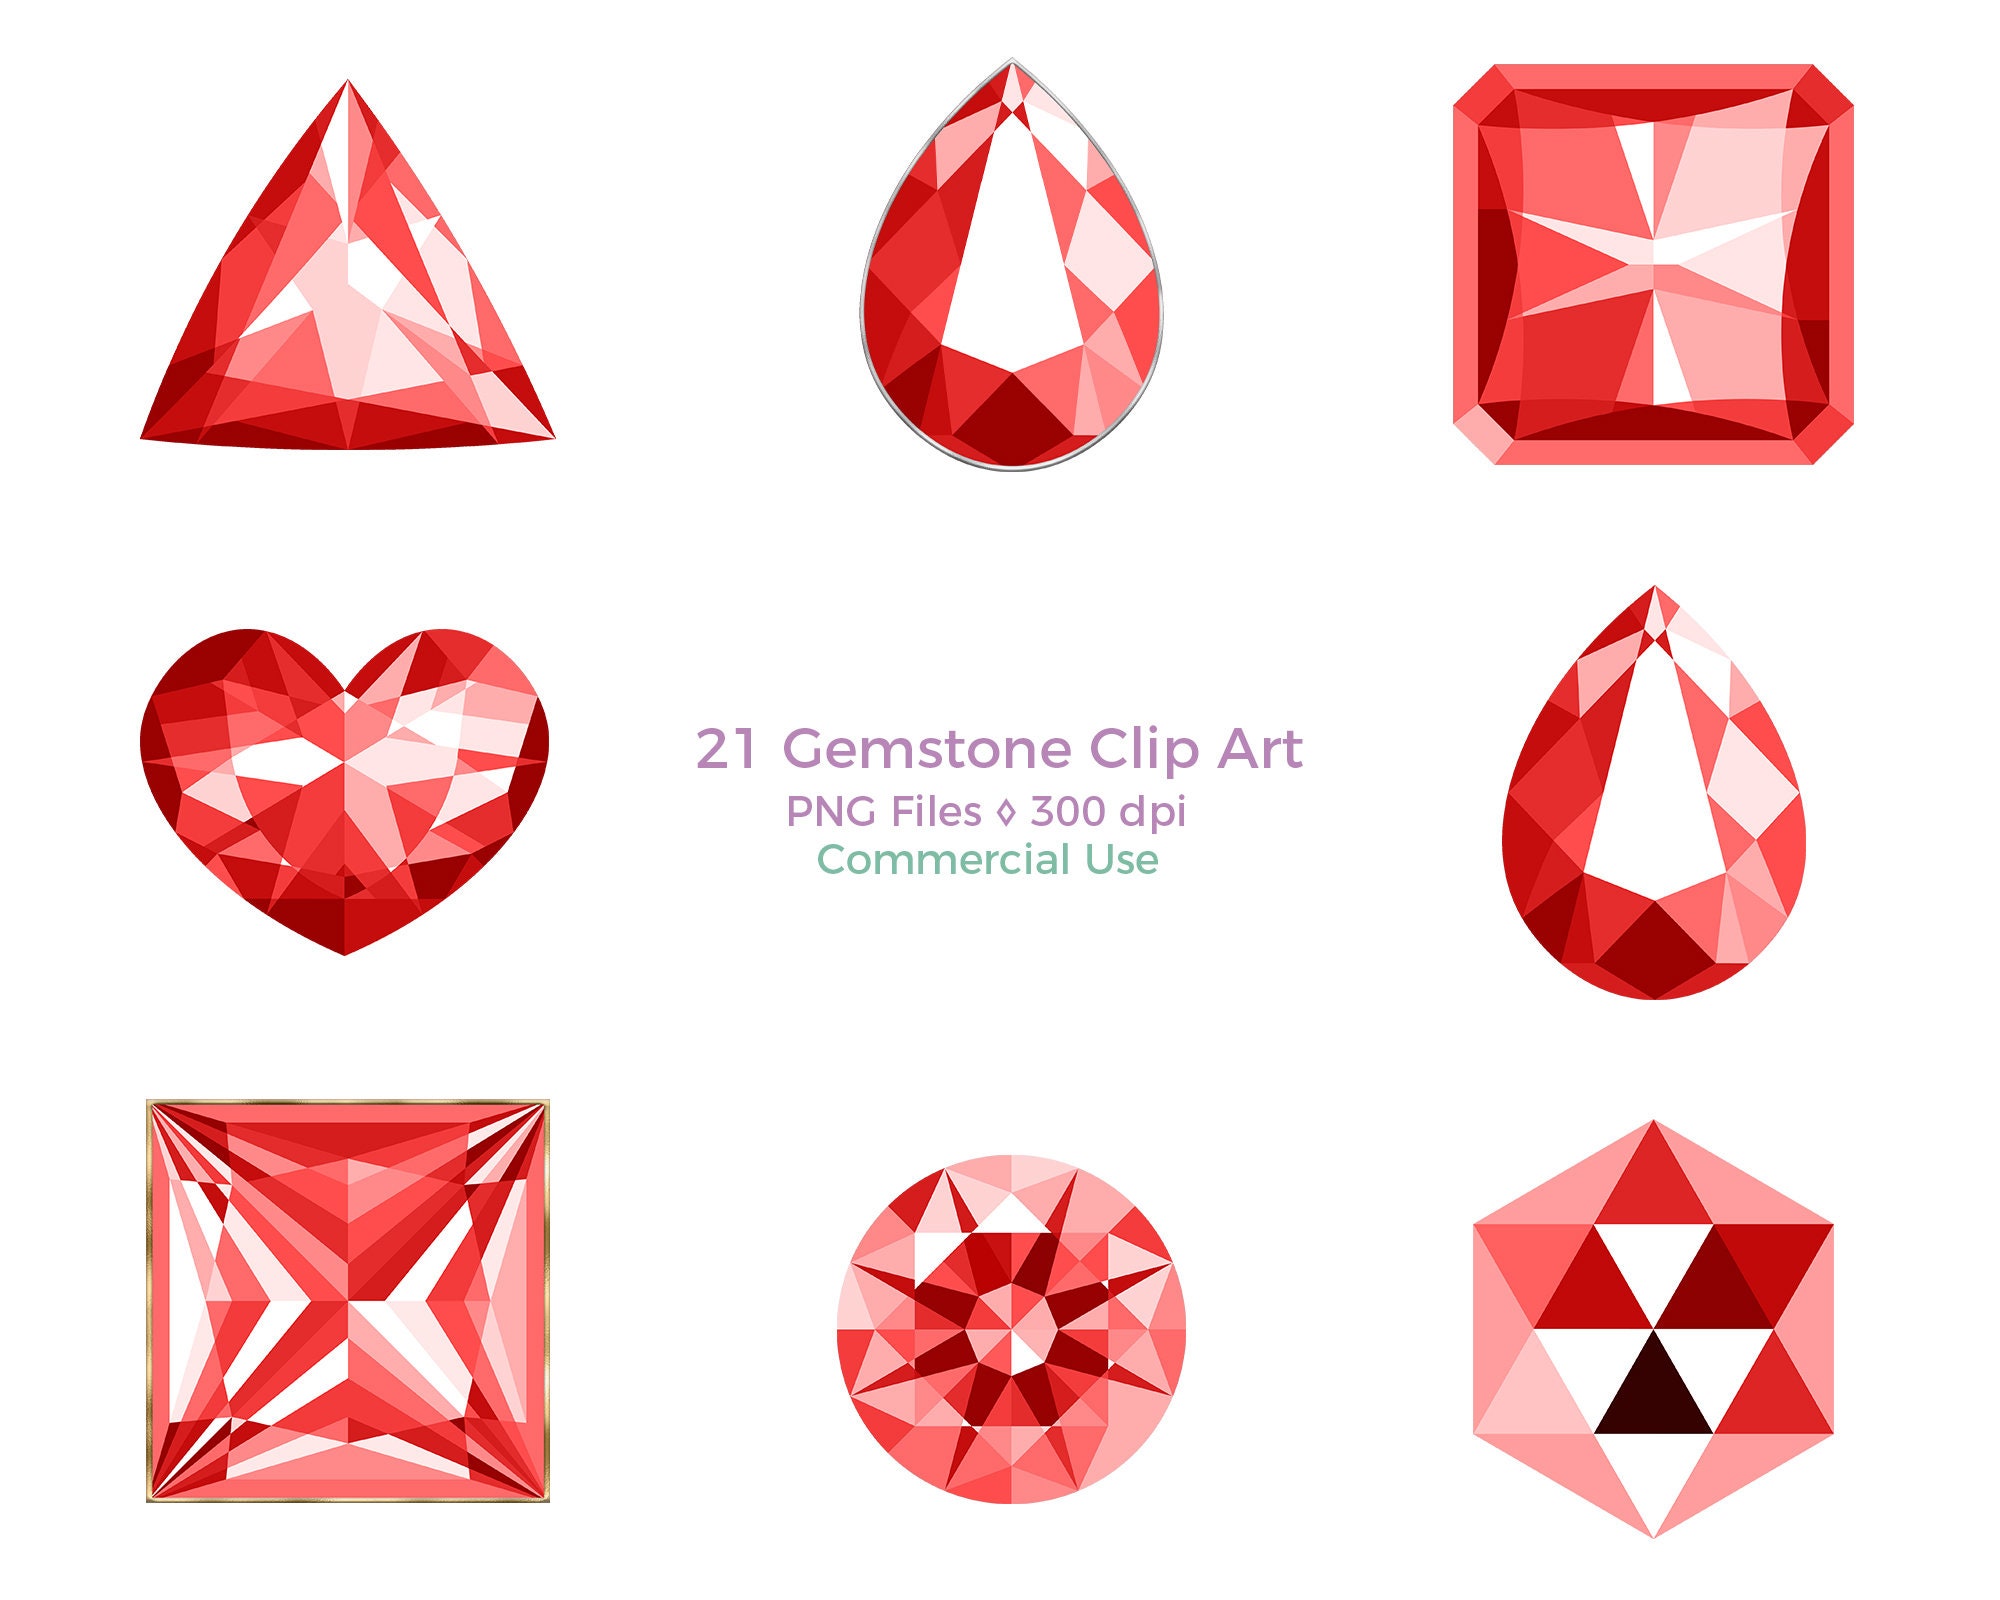 Heart Gem PNG Picture, Hand Painted Red Heart Gems, Gem Clipart, Gems, Red  Gems Illustration PNG Image For Free Download